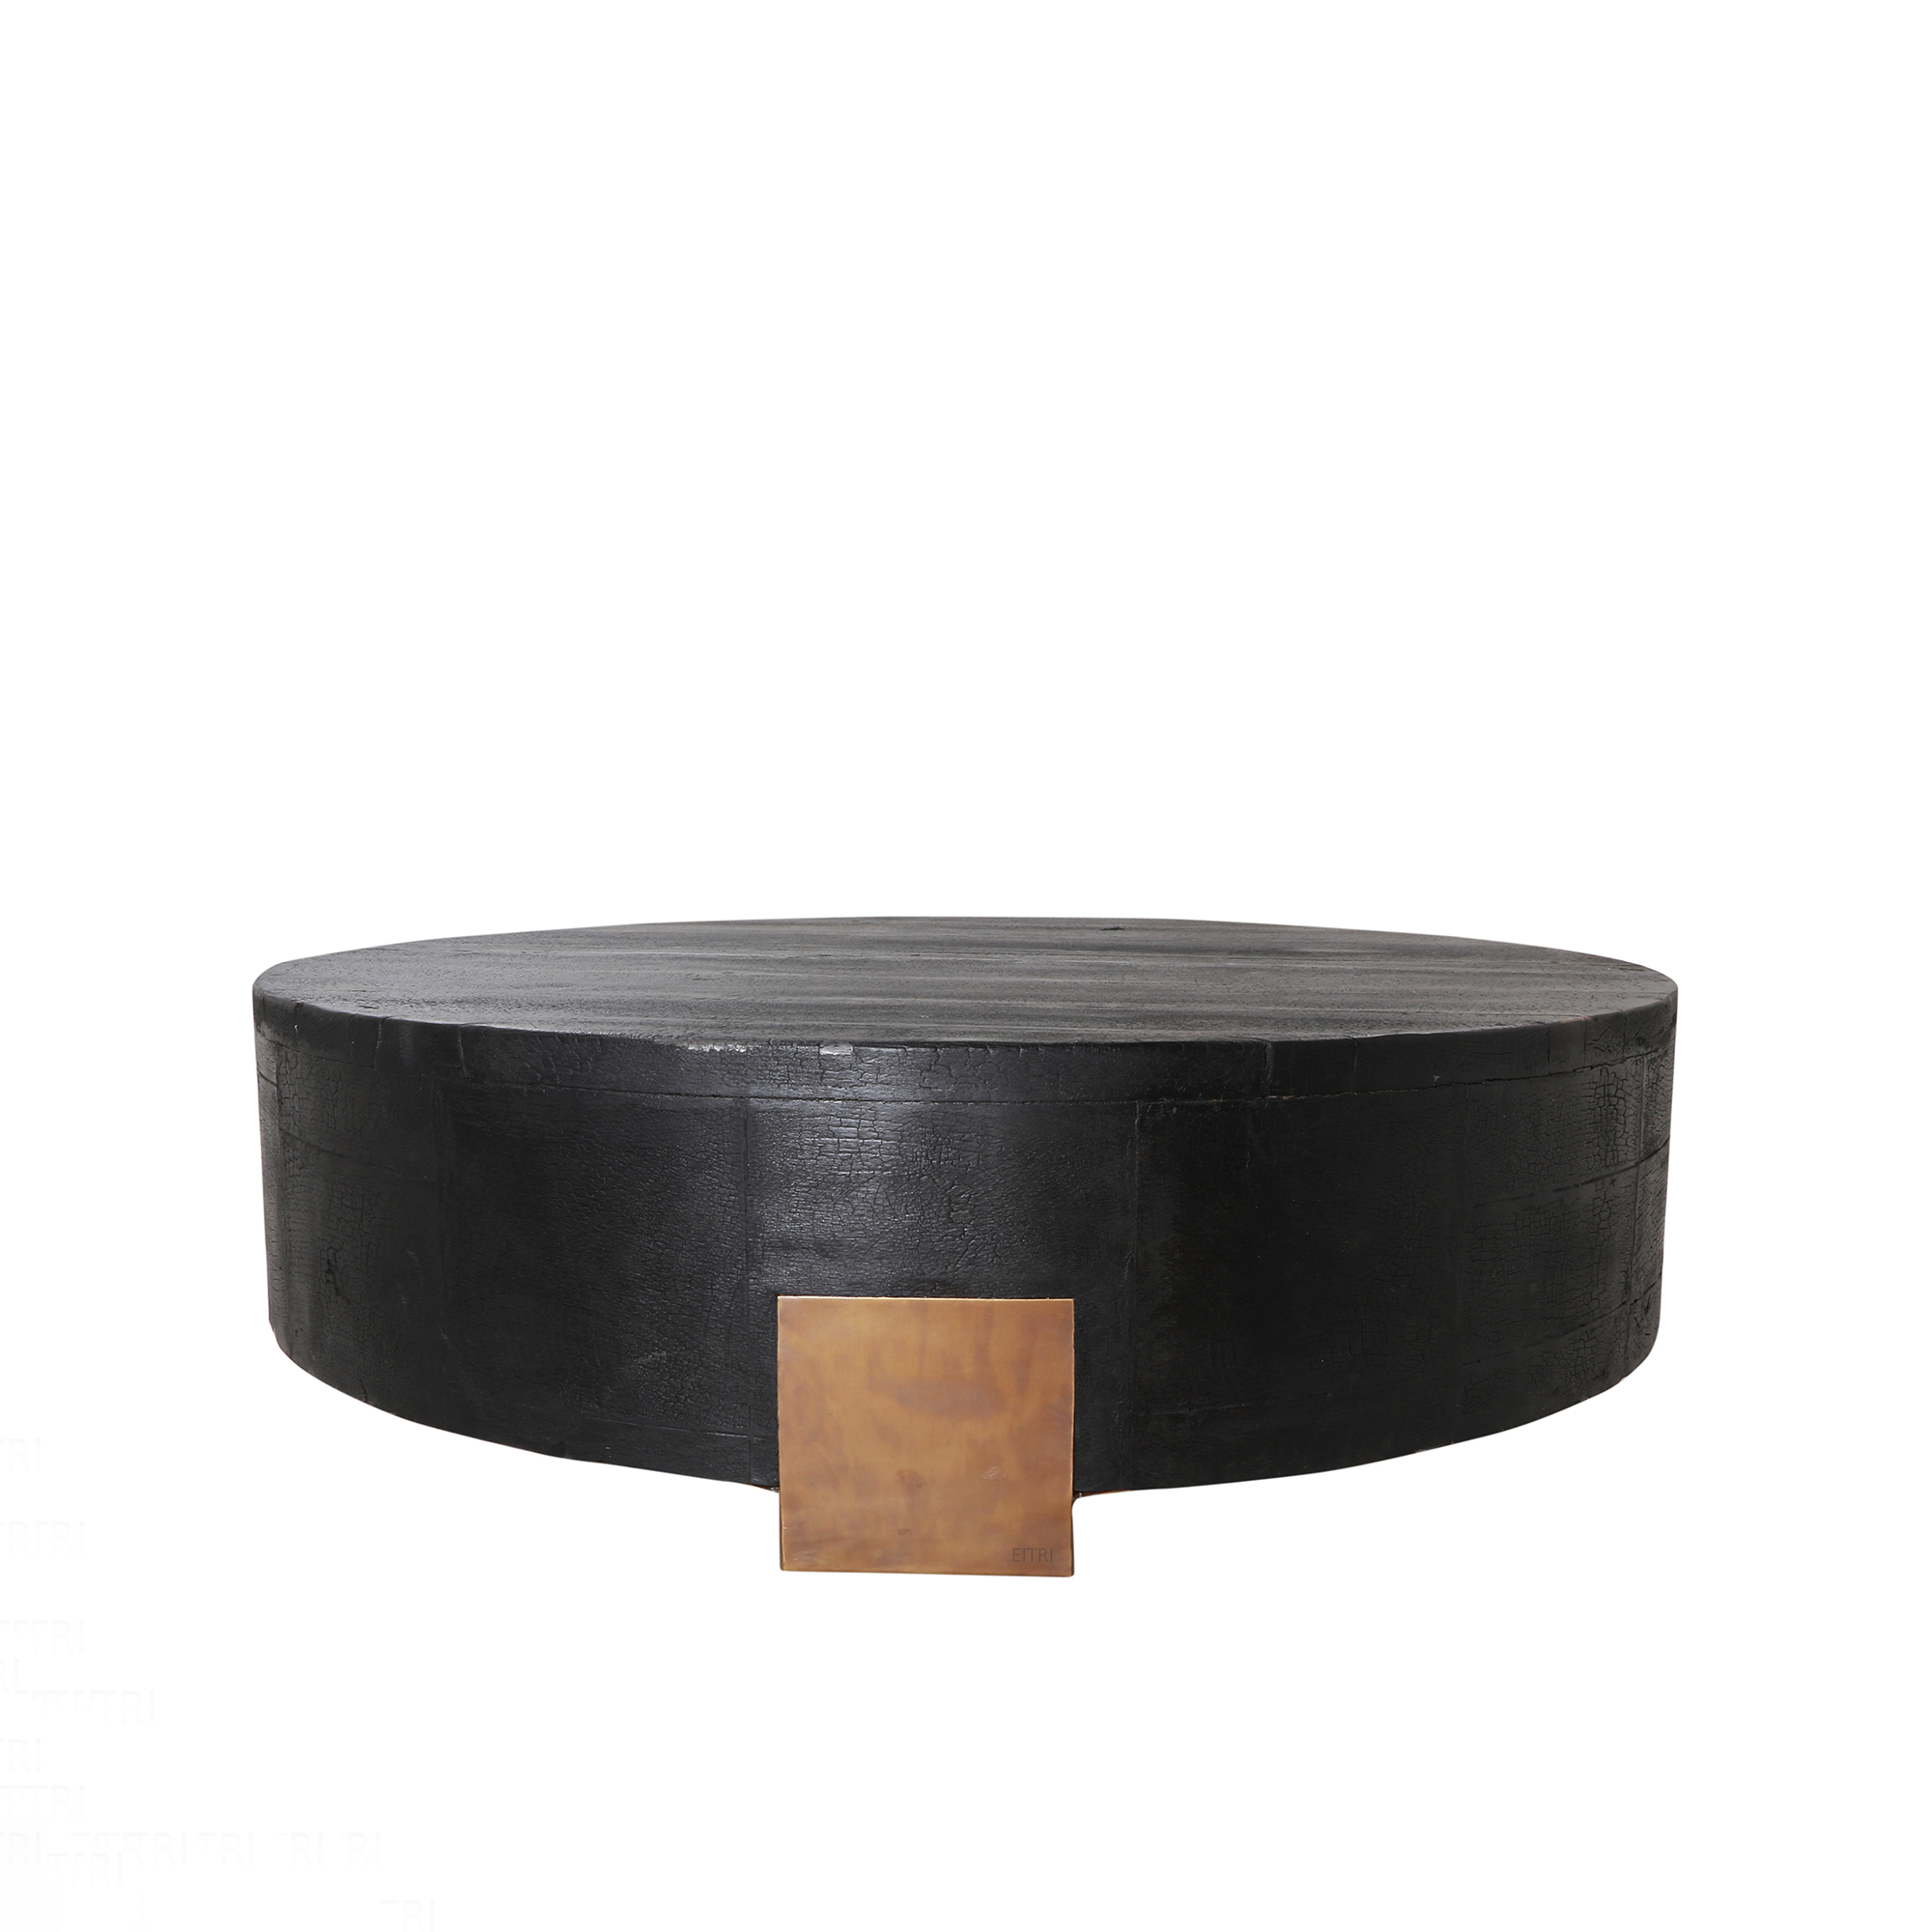 Carbon-12 Coffee Table Round